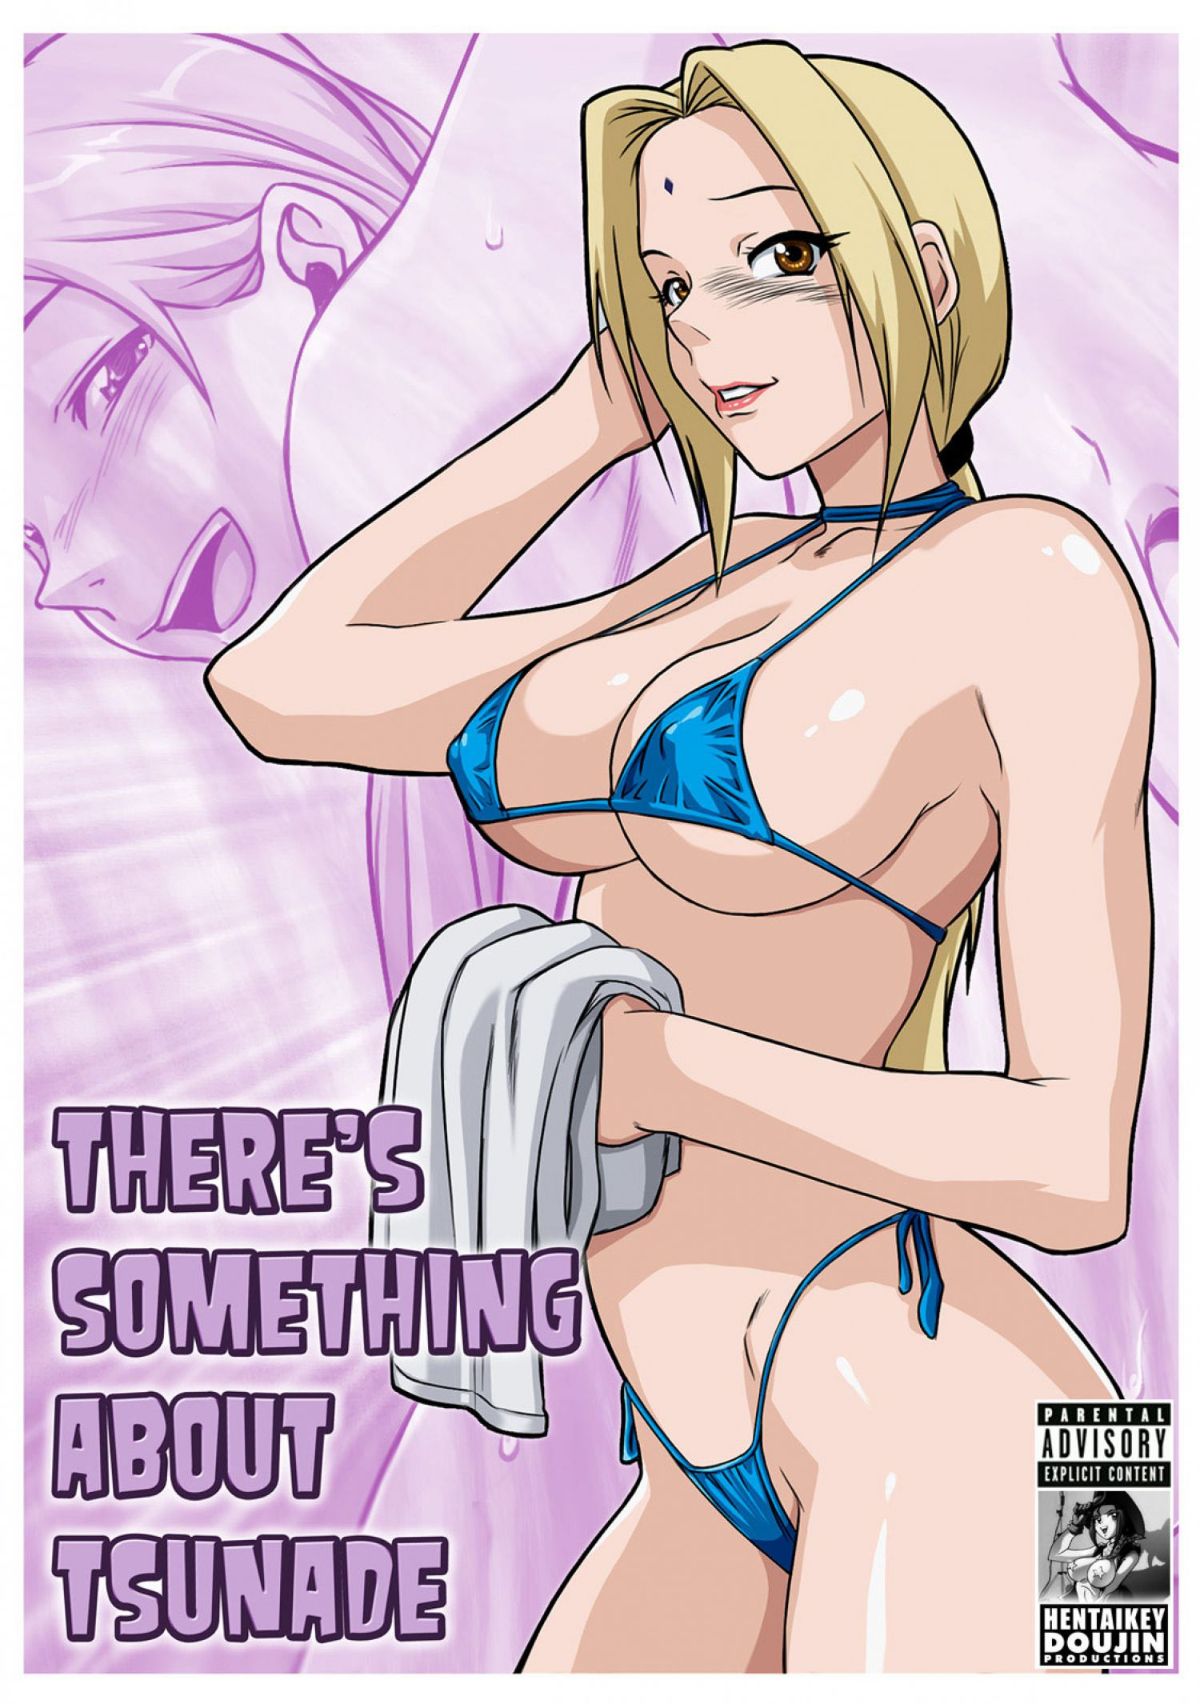 Theres Something About Tsunade Hentai pt-br 01